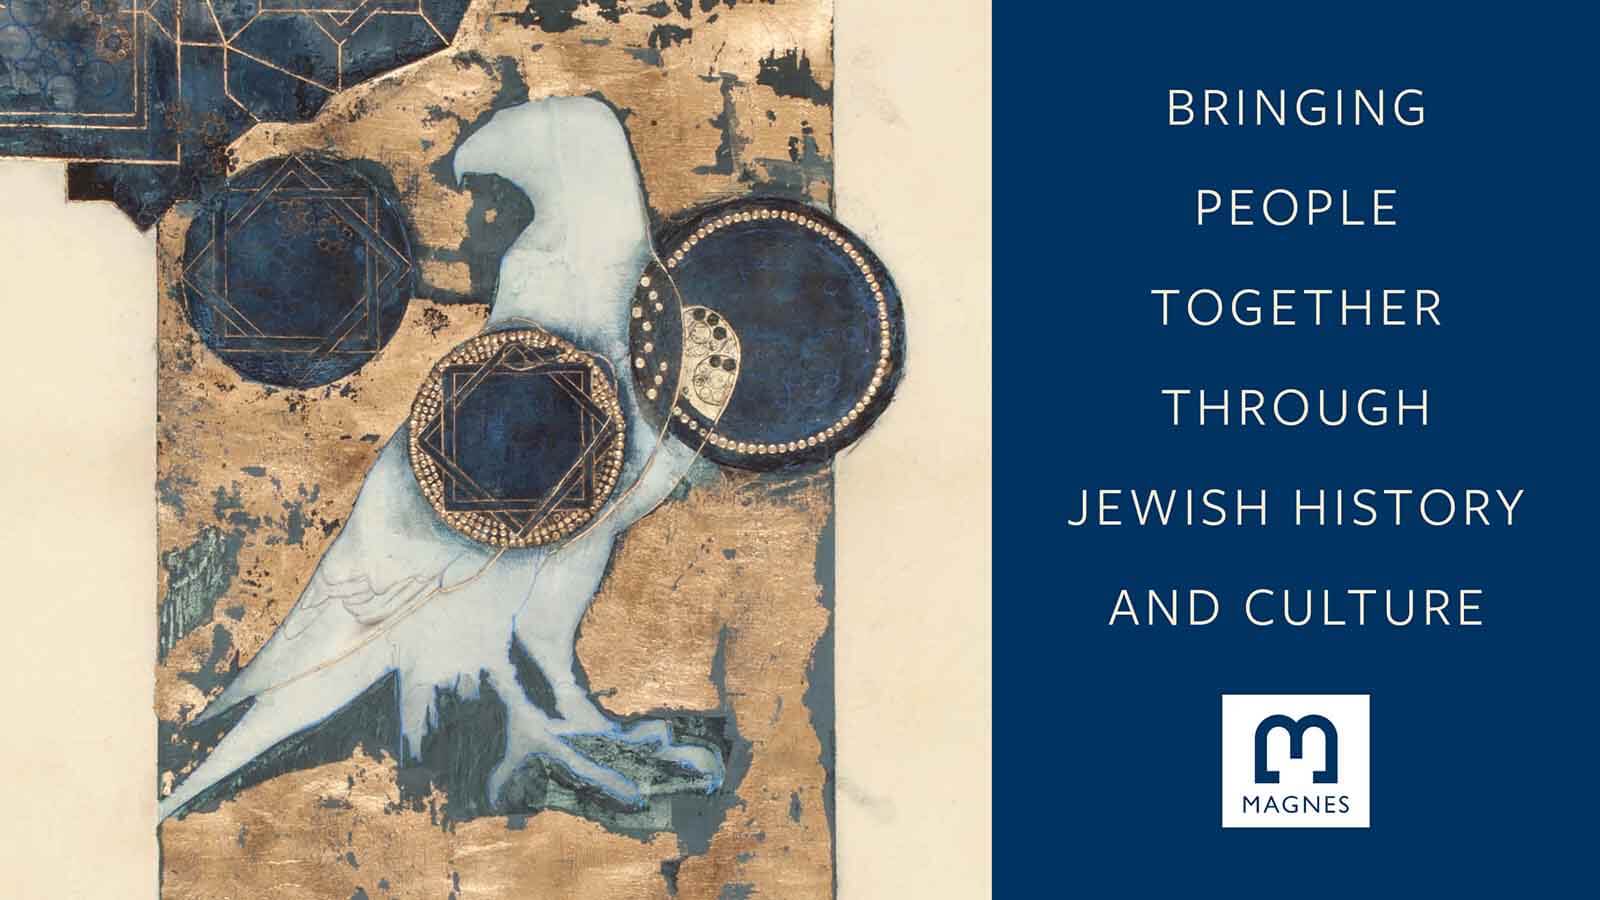 On left: Ellen Frank's The Book of Judith - a bluish white bird silhouette on gold and dark blue. On right: text "Building people together through Jewish history and culture" with Magnes logo on dark blue background